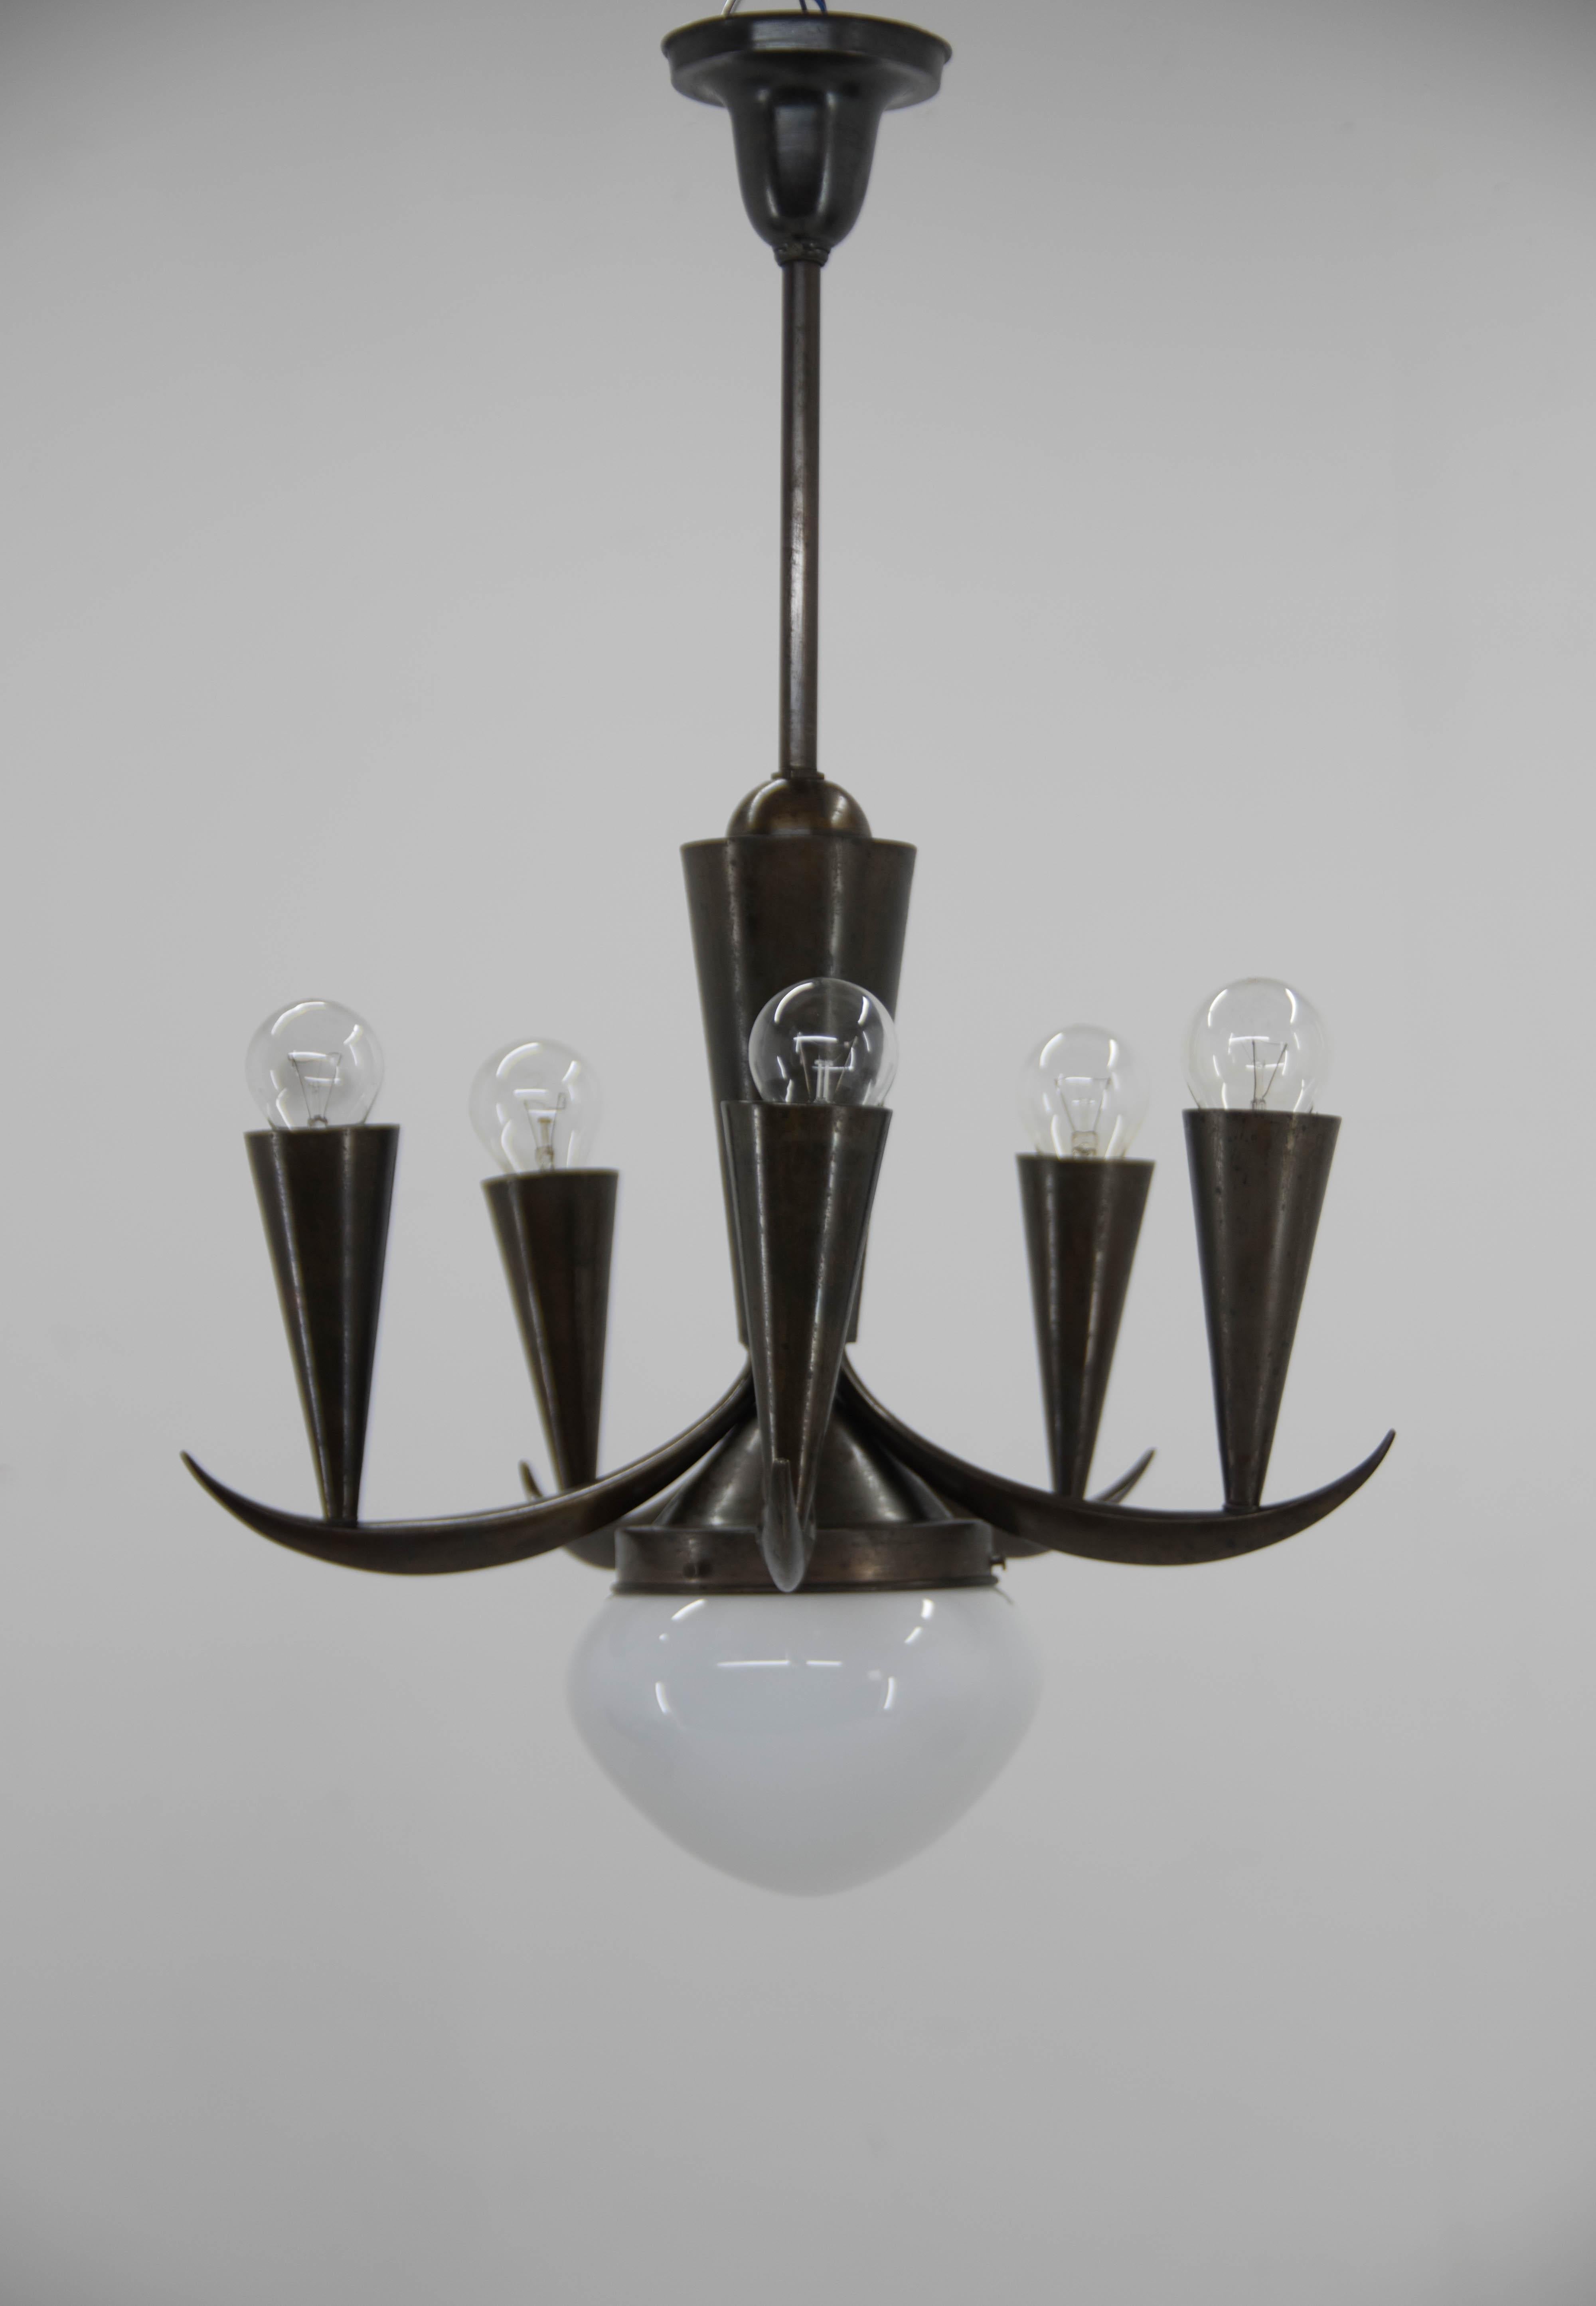 Very rare chandelier in Cubistic style made by IAS in 1910s.
Patinated brass and opaline glass shade.
Restored: cleaned, rewired: two separate circuits - 1+5x40W, E25-E27 bulbs
US wiring compatible.